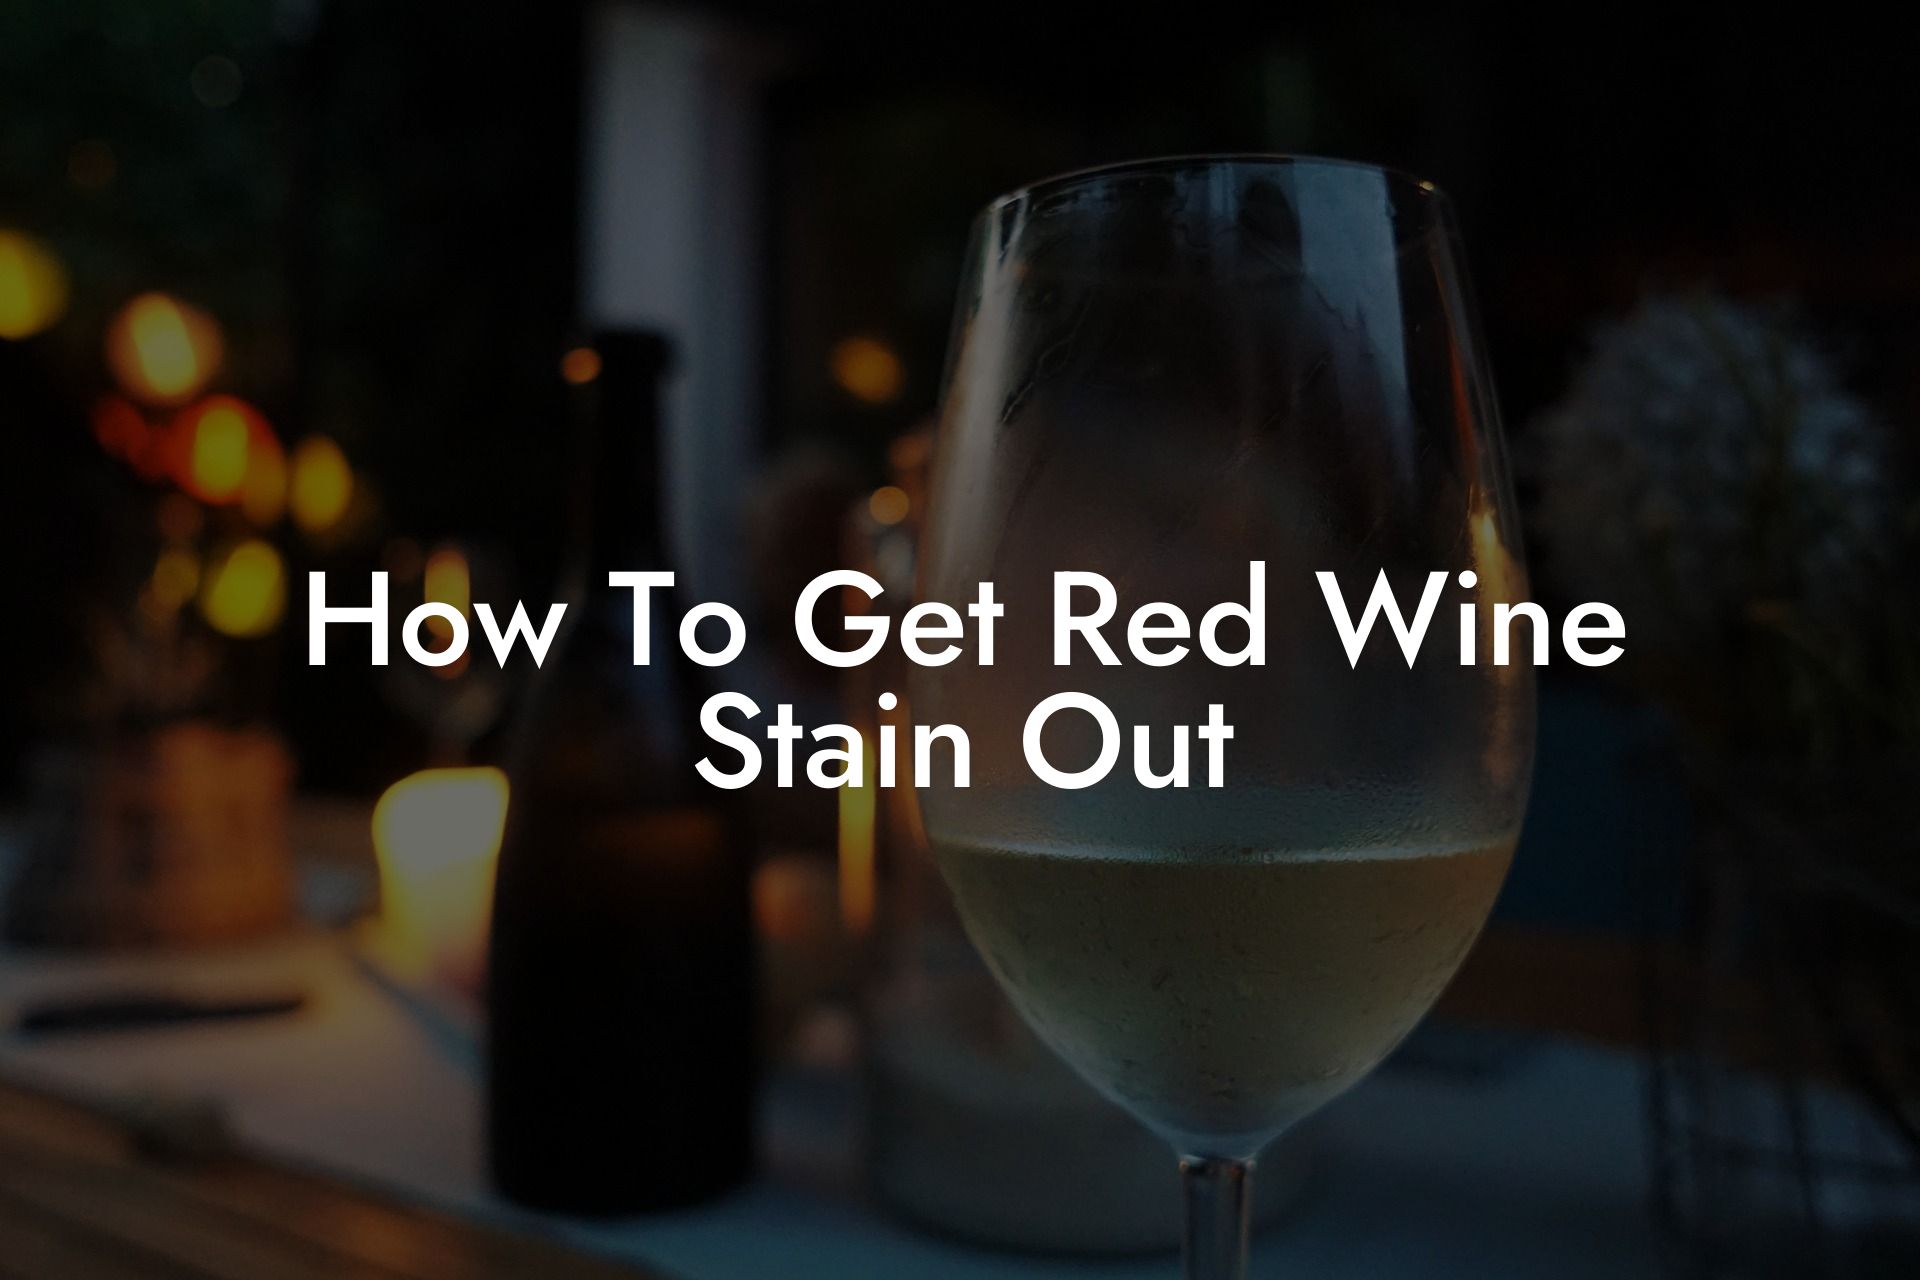 How To Get Red Wine Stain Out